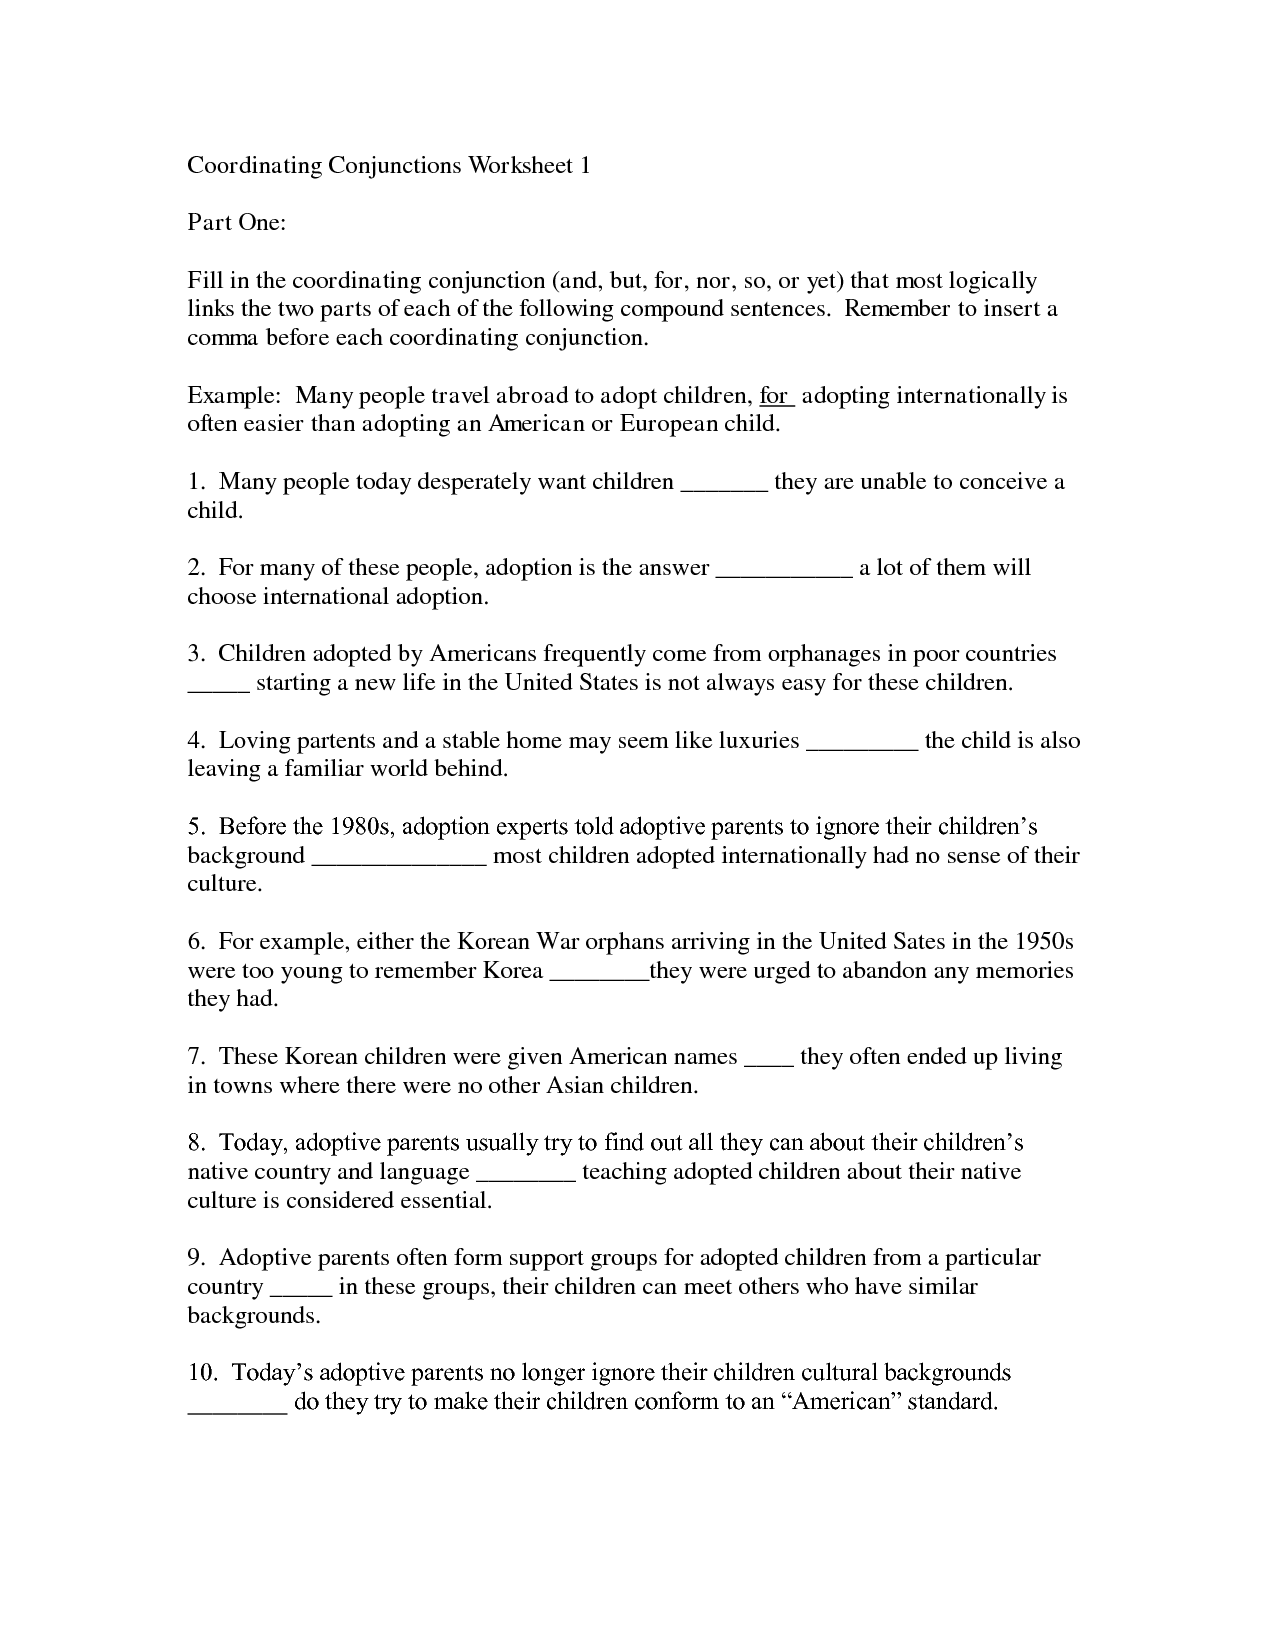 16 Best Images Of Subordinating Conjunctions With Commas Worksheets Coordinating And Worksheet